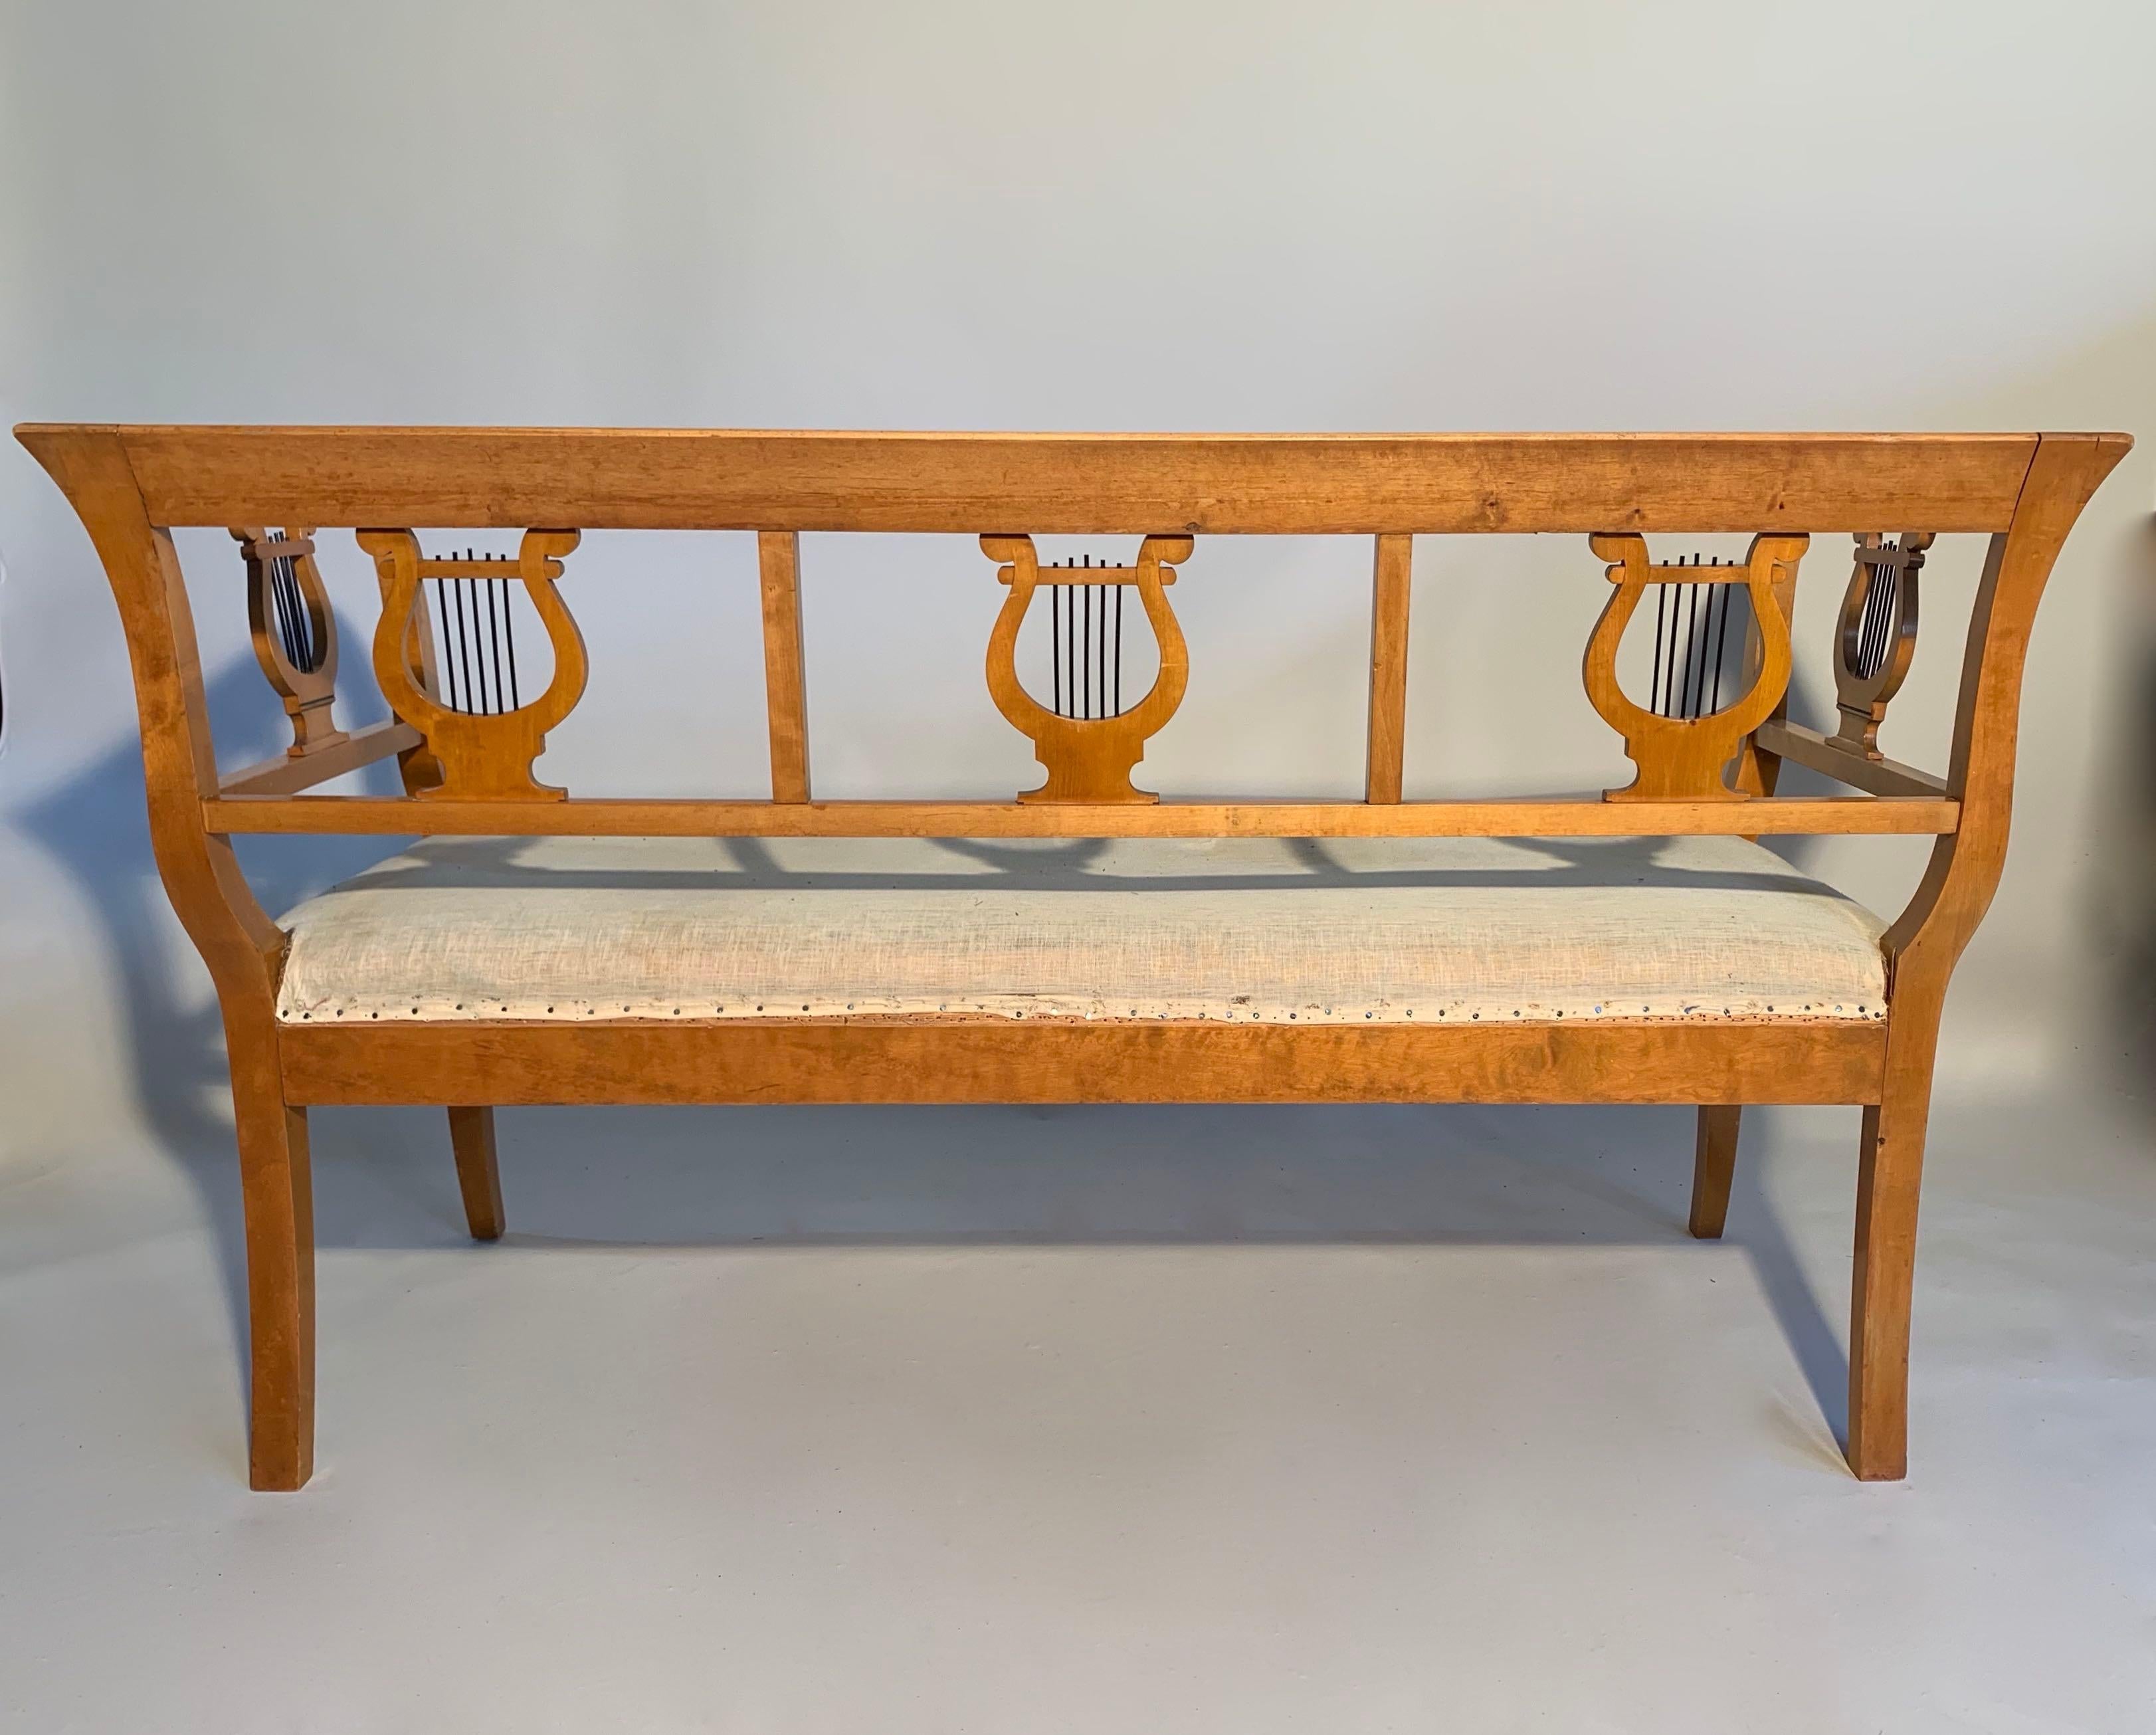 Swedish birch Biedermeier sofa with lovely small proportions. Decorated with classical hand carved Lyres to the back and sides. The seat has the original calico. New upholstery is included in the price. This is a very nice example of these hard to